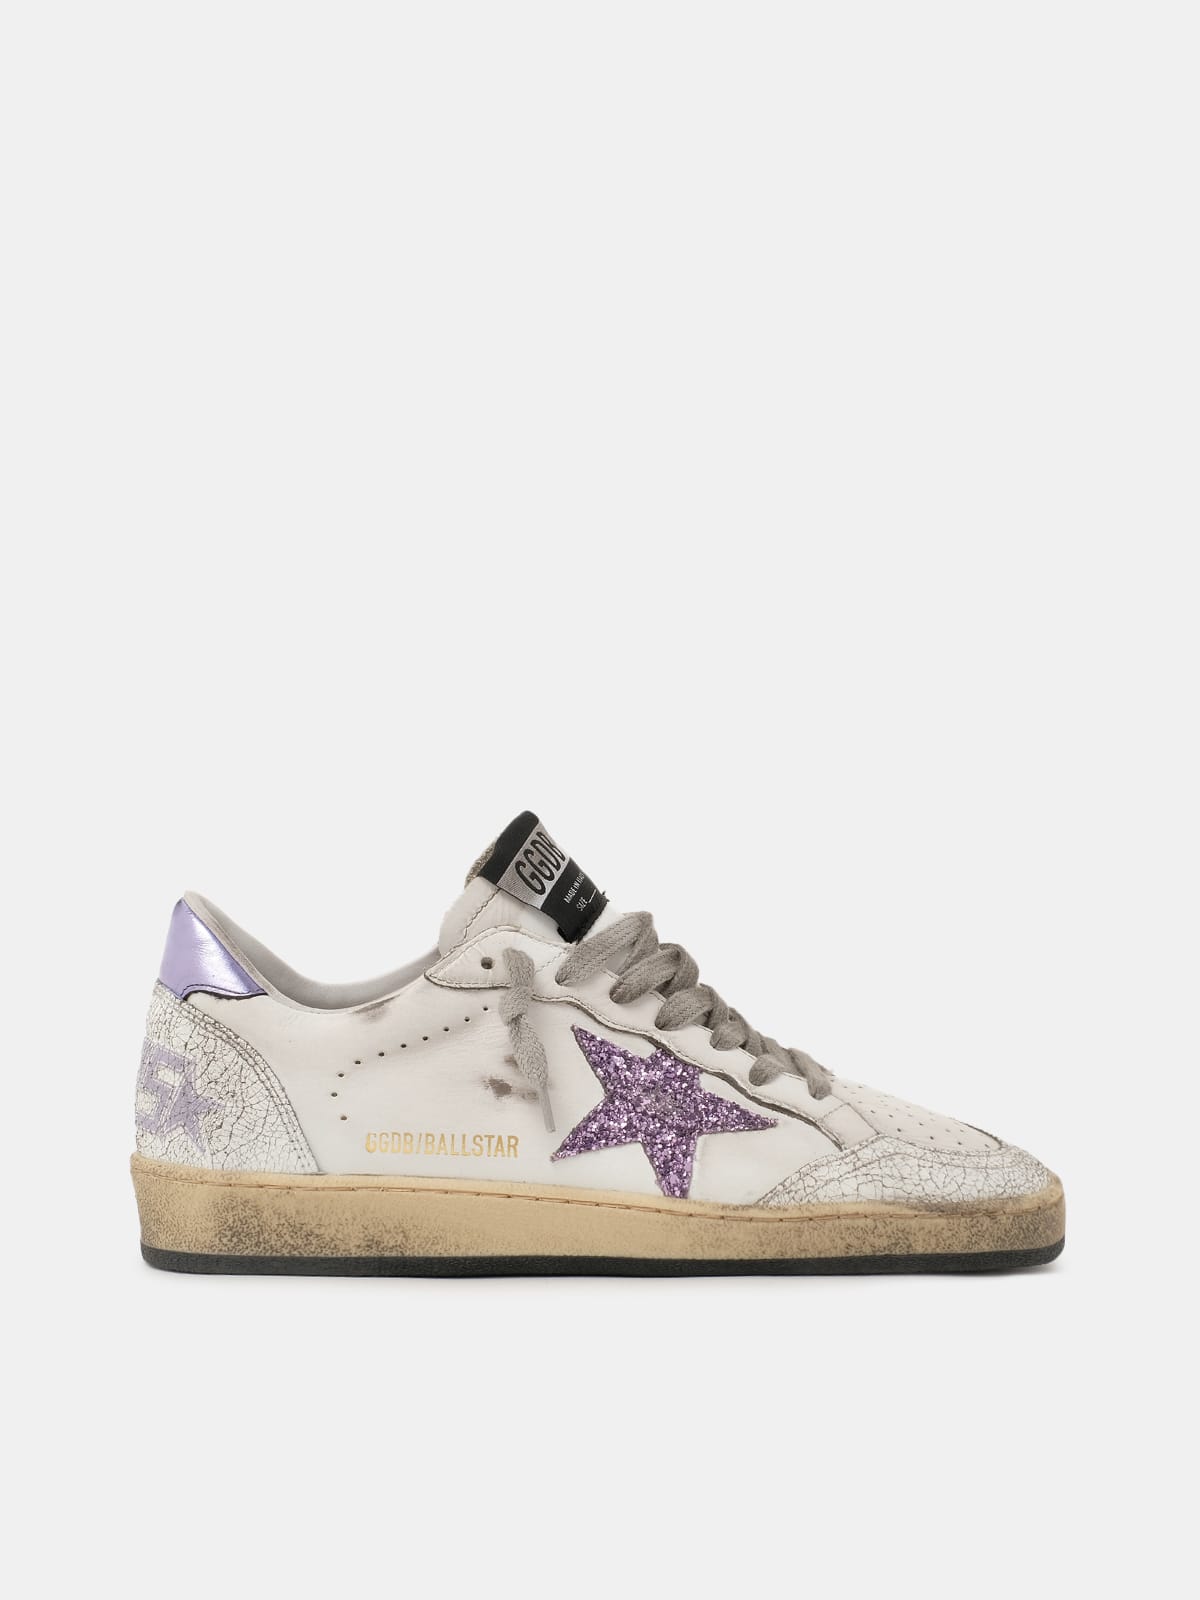 Play Ball Glitter Sneakers by VH Purple Gold / 11